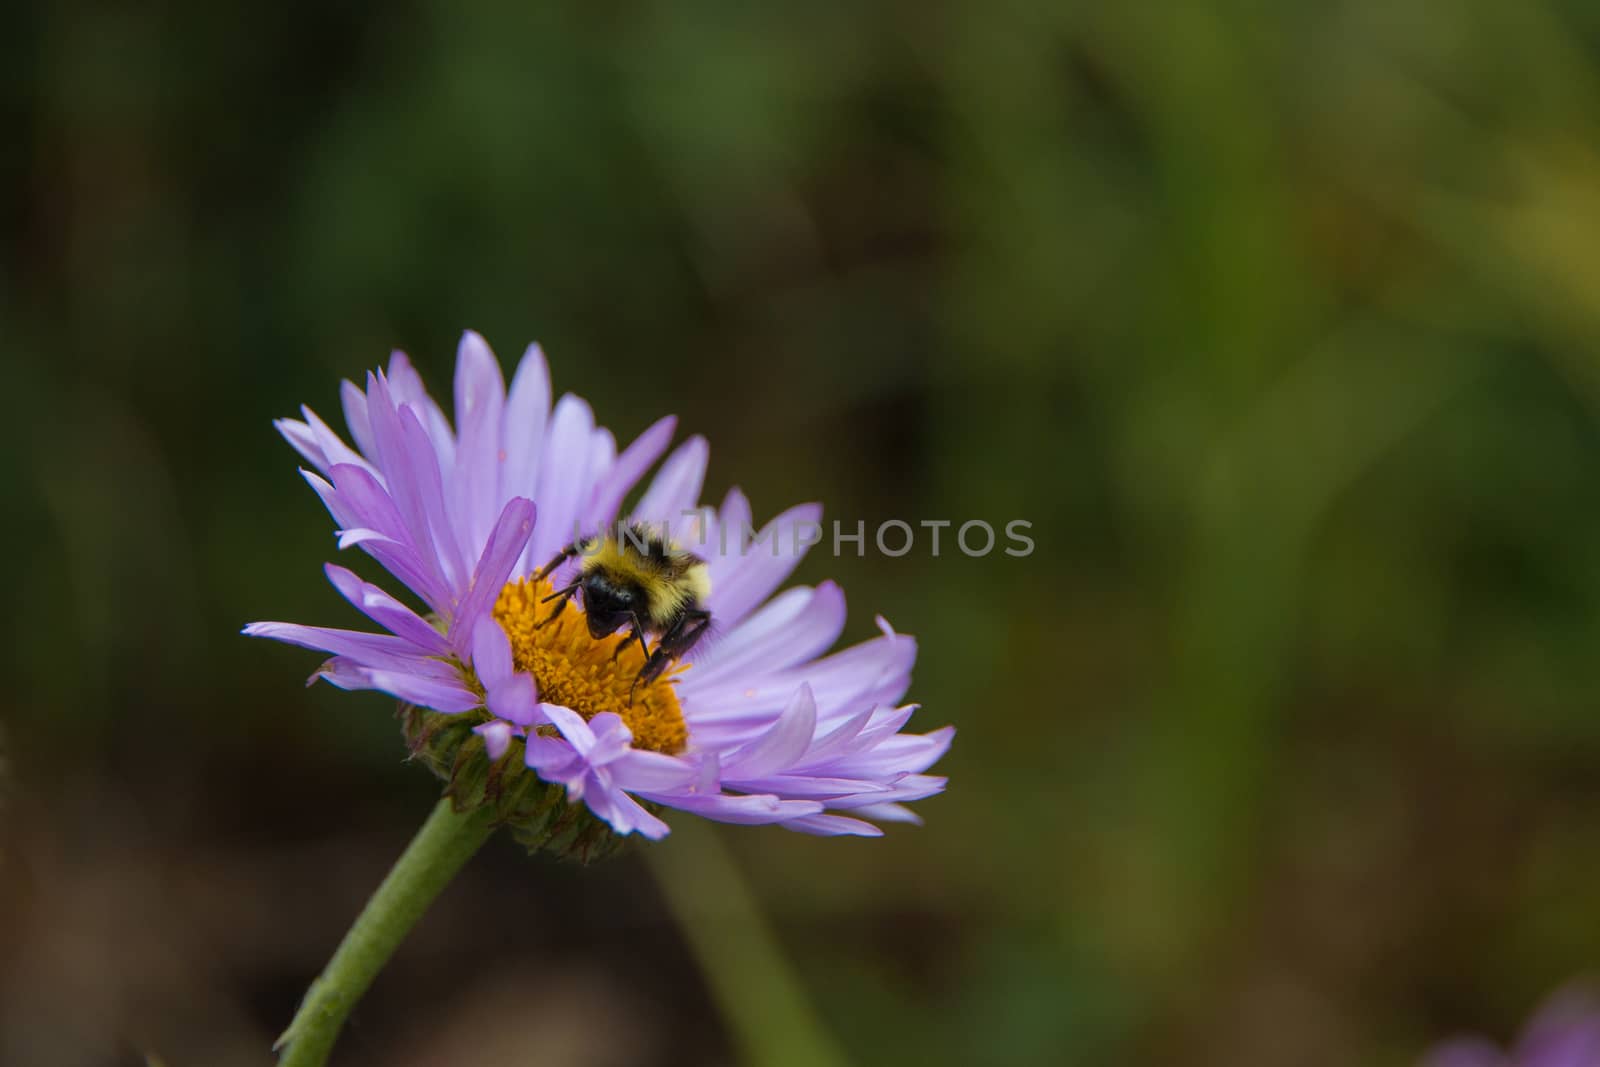 Colorado Tansy Aster Flower with a Bee by sheaoliver